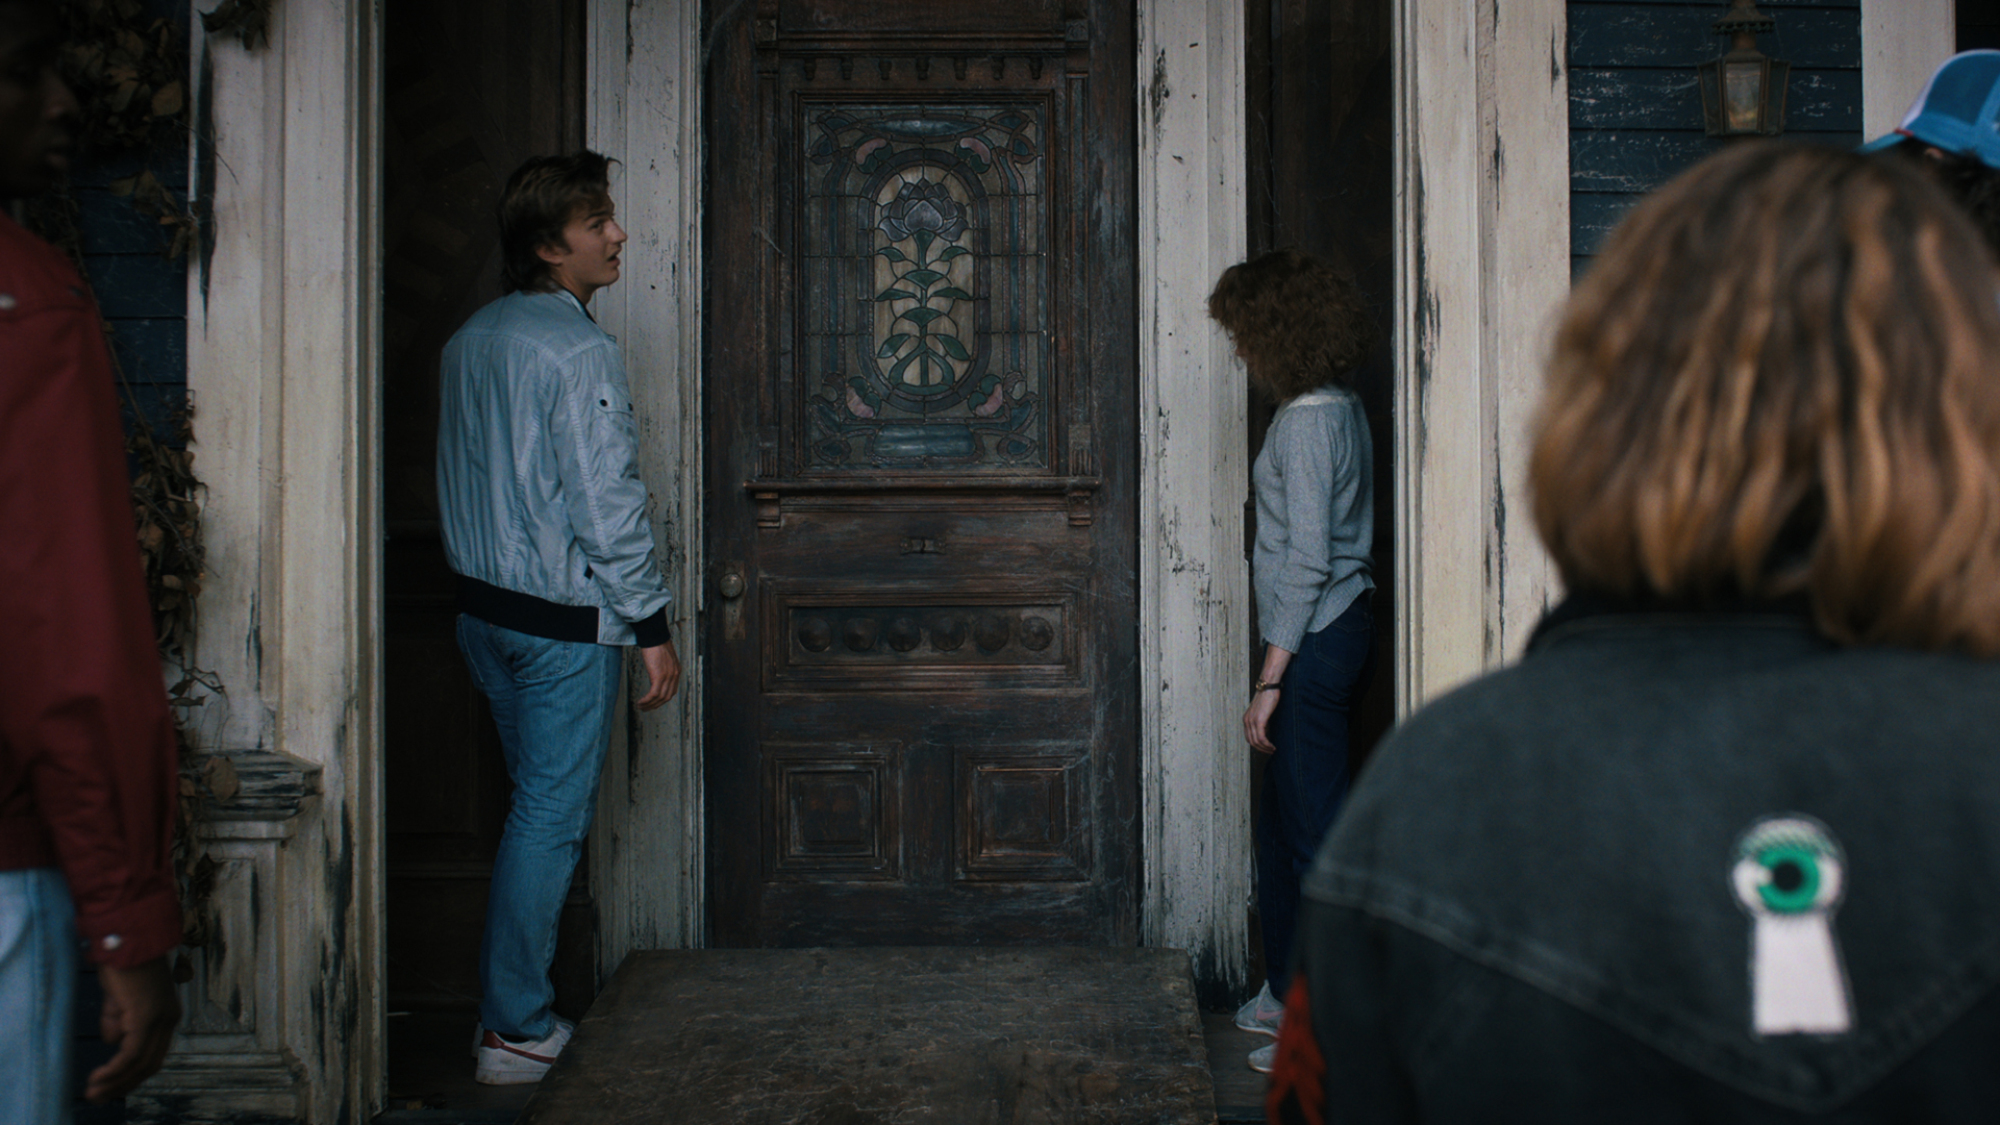 People stand outside a creepy old house's door.